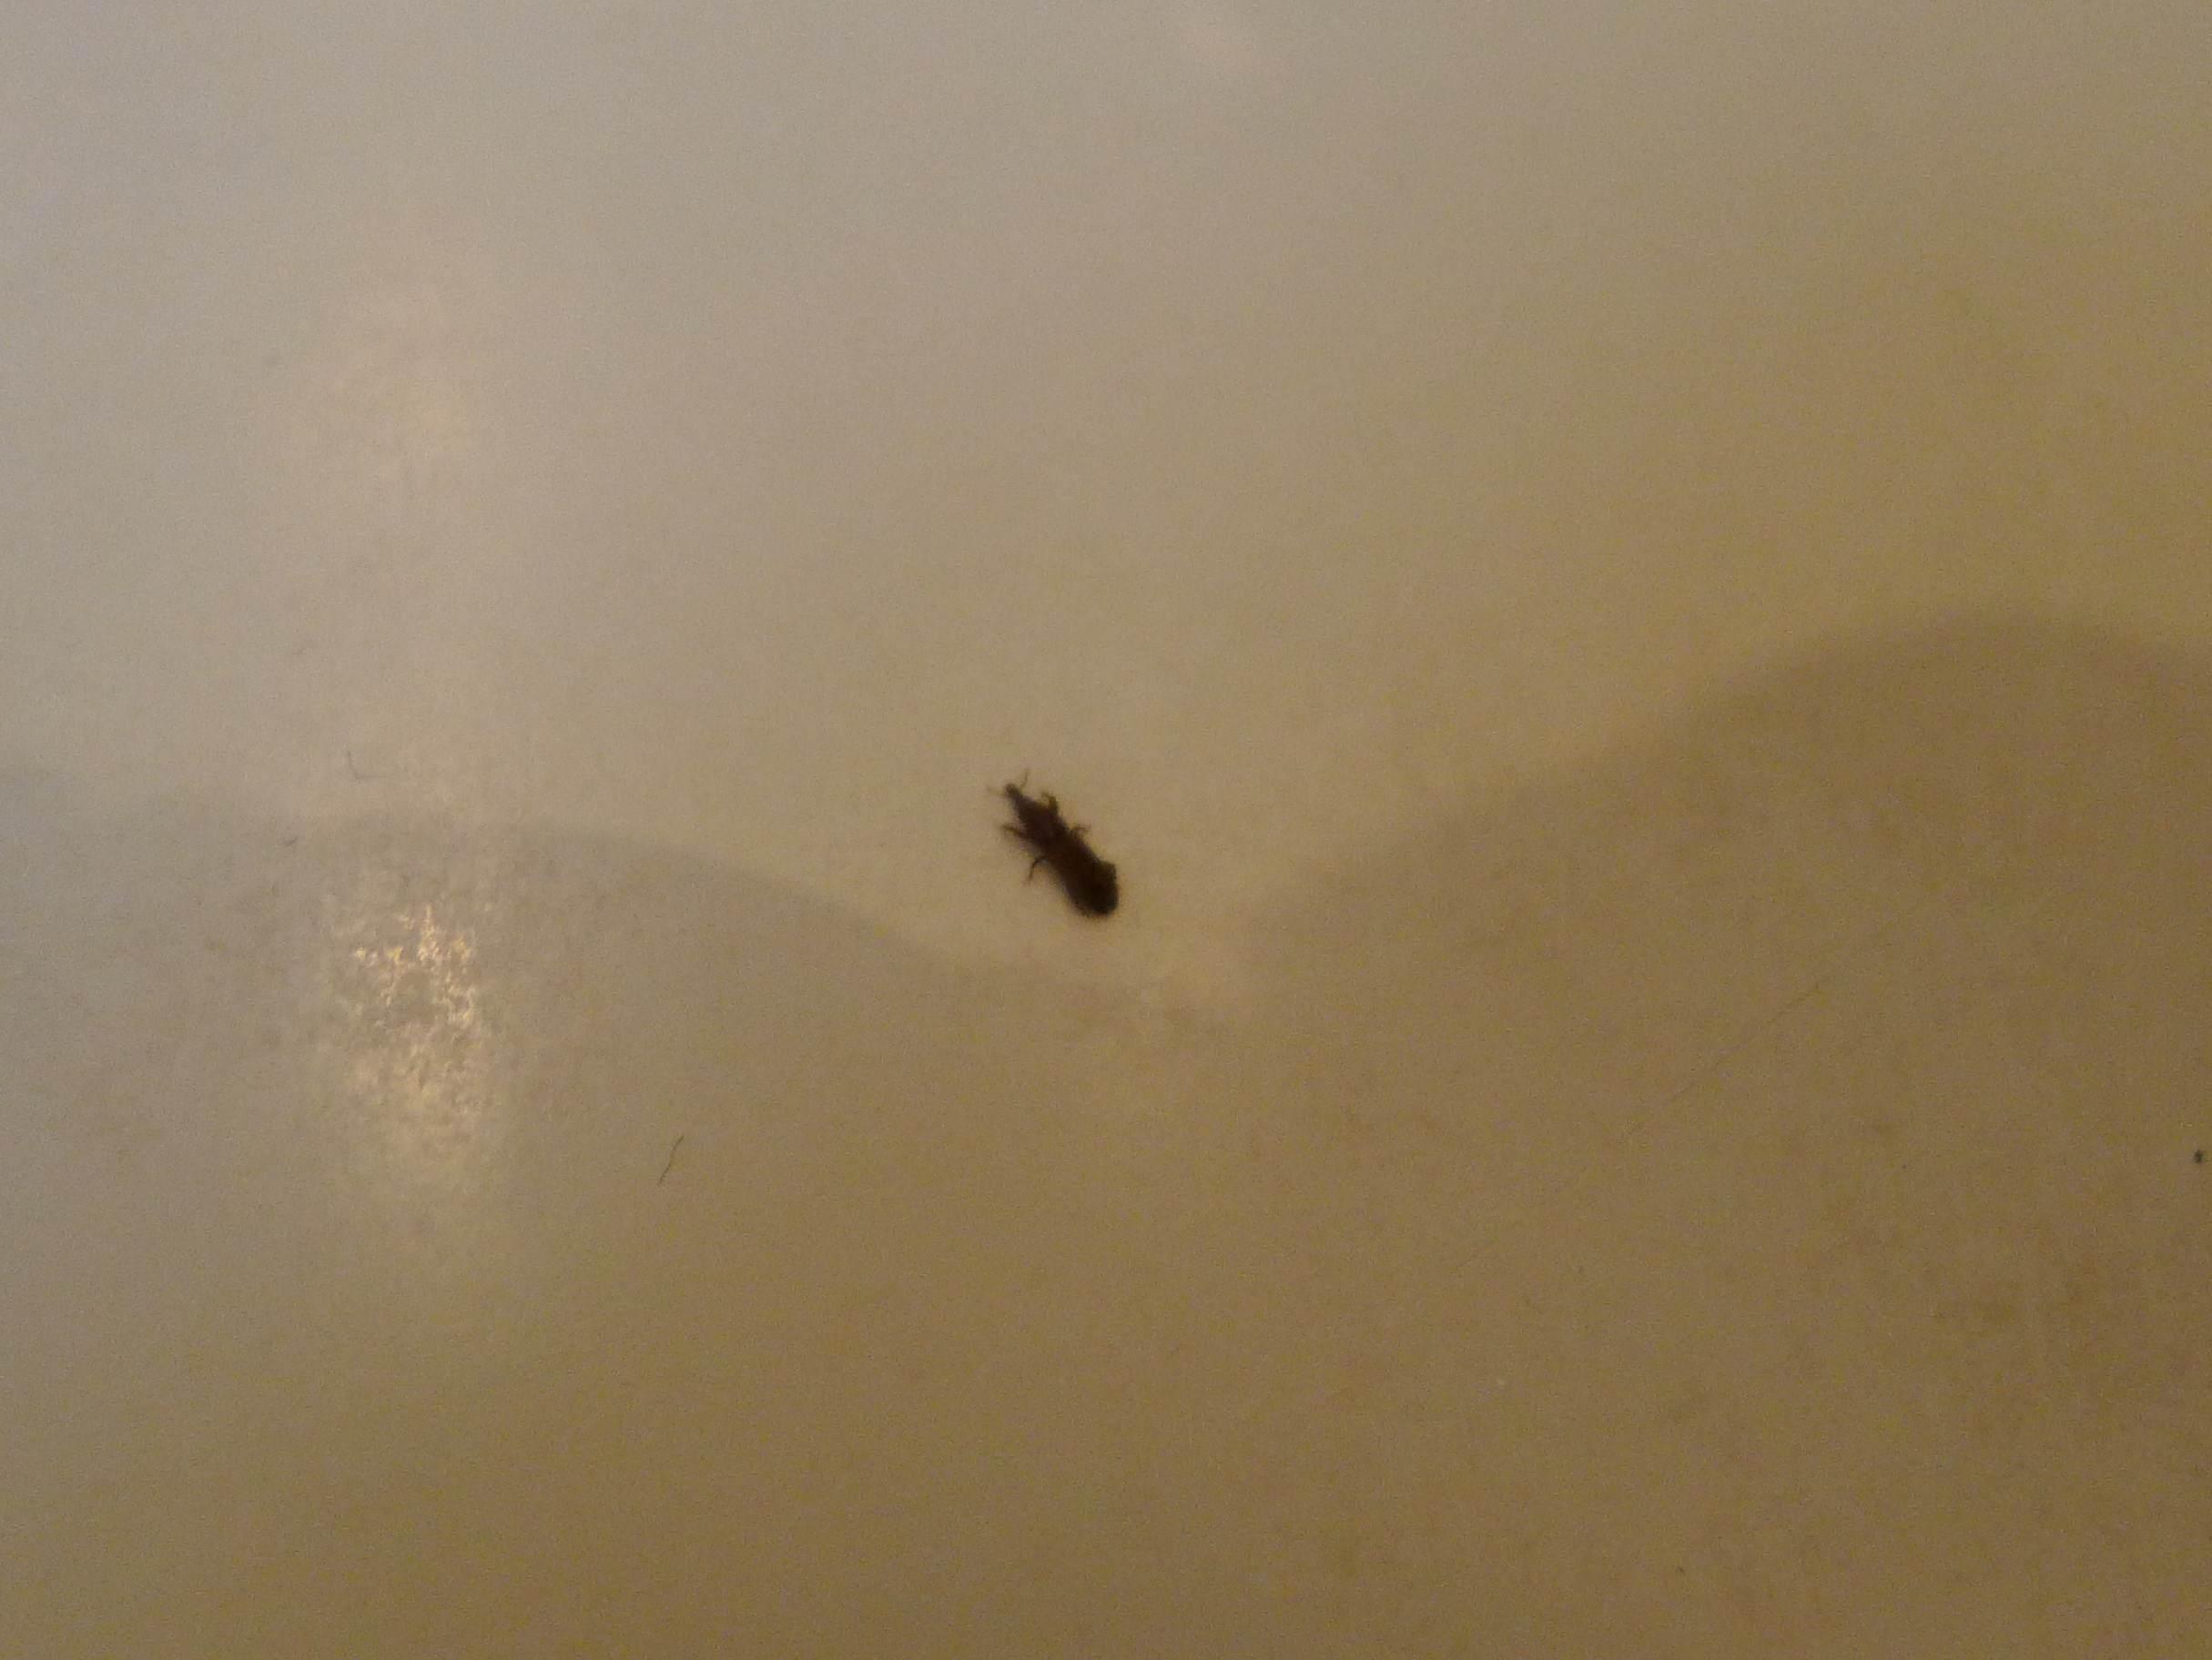 really tiny bugs in bathroom by sink